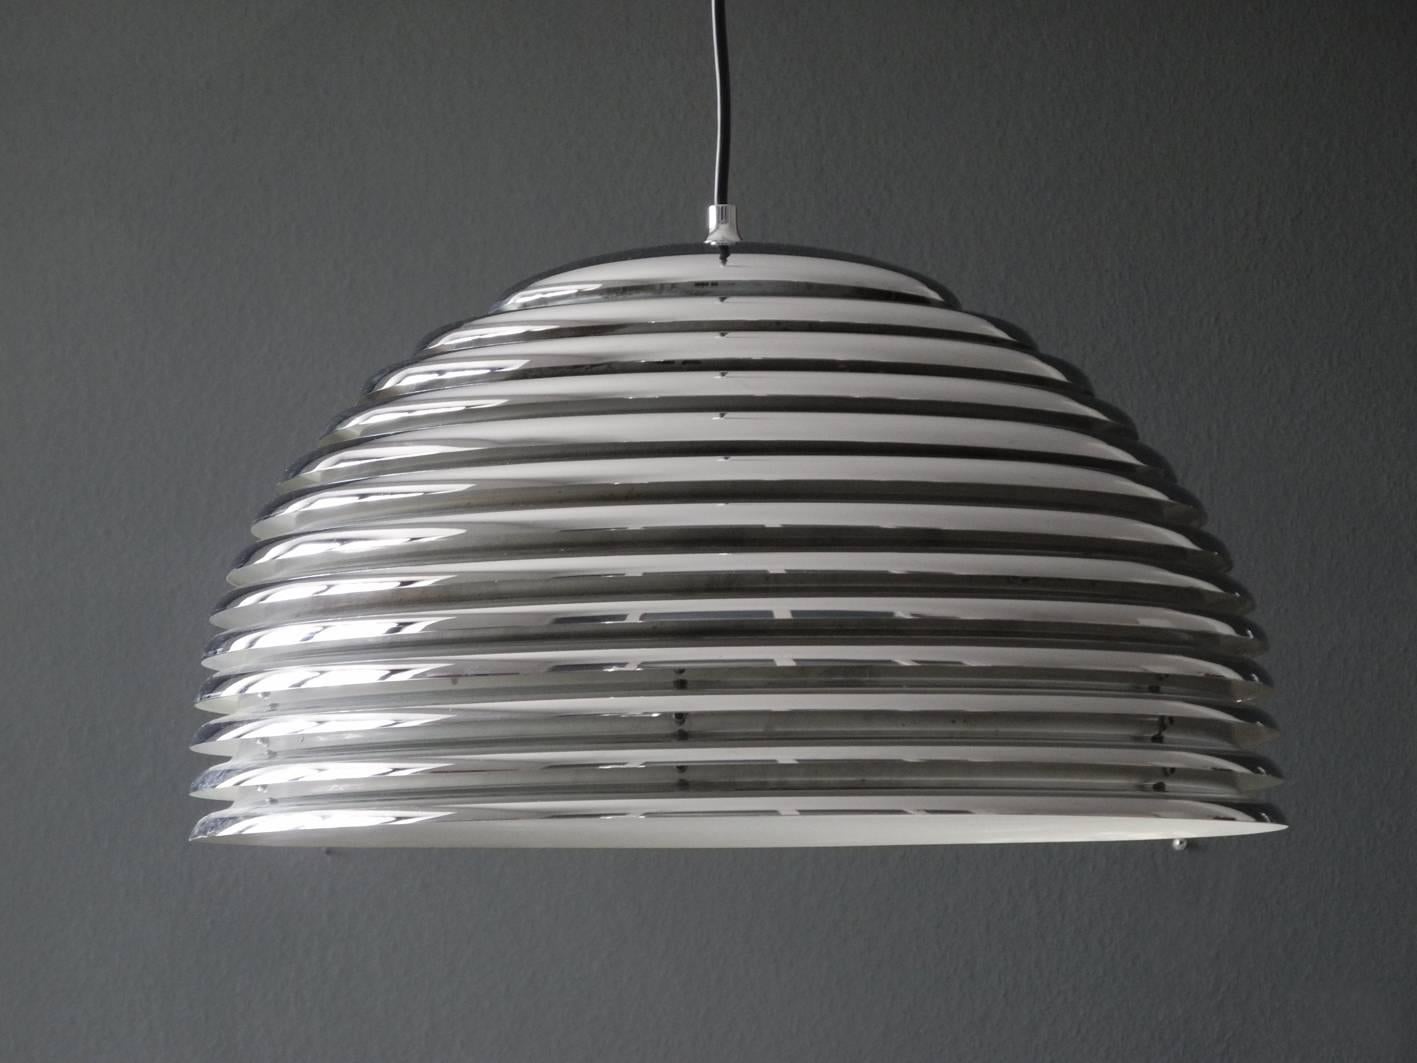 Large original Saturno chrome metal pendant lamp by Kazuo Motozawa for Staff from the 1970s.
High quality minimalistic design. Lampshade is consisting of several individual metal rings, which are chrome-plated at the outside and painted white